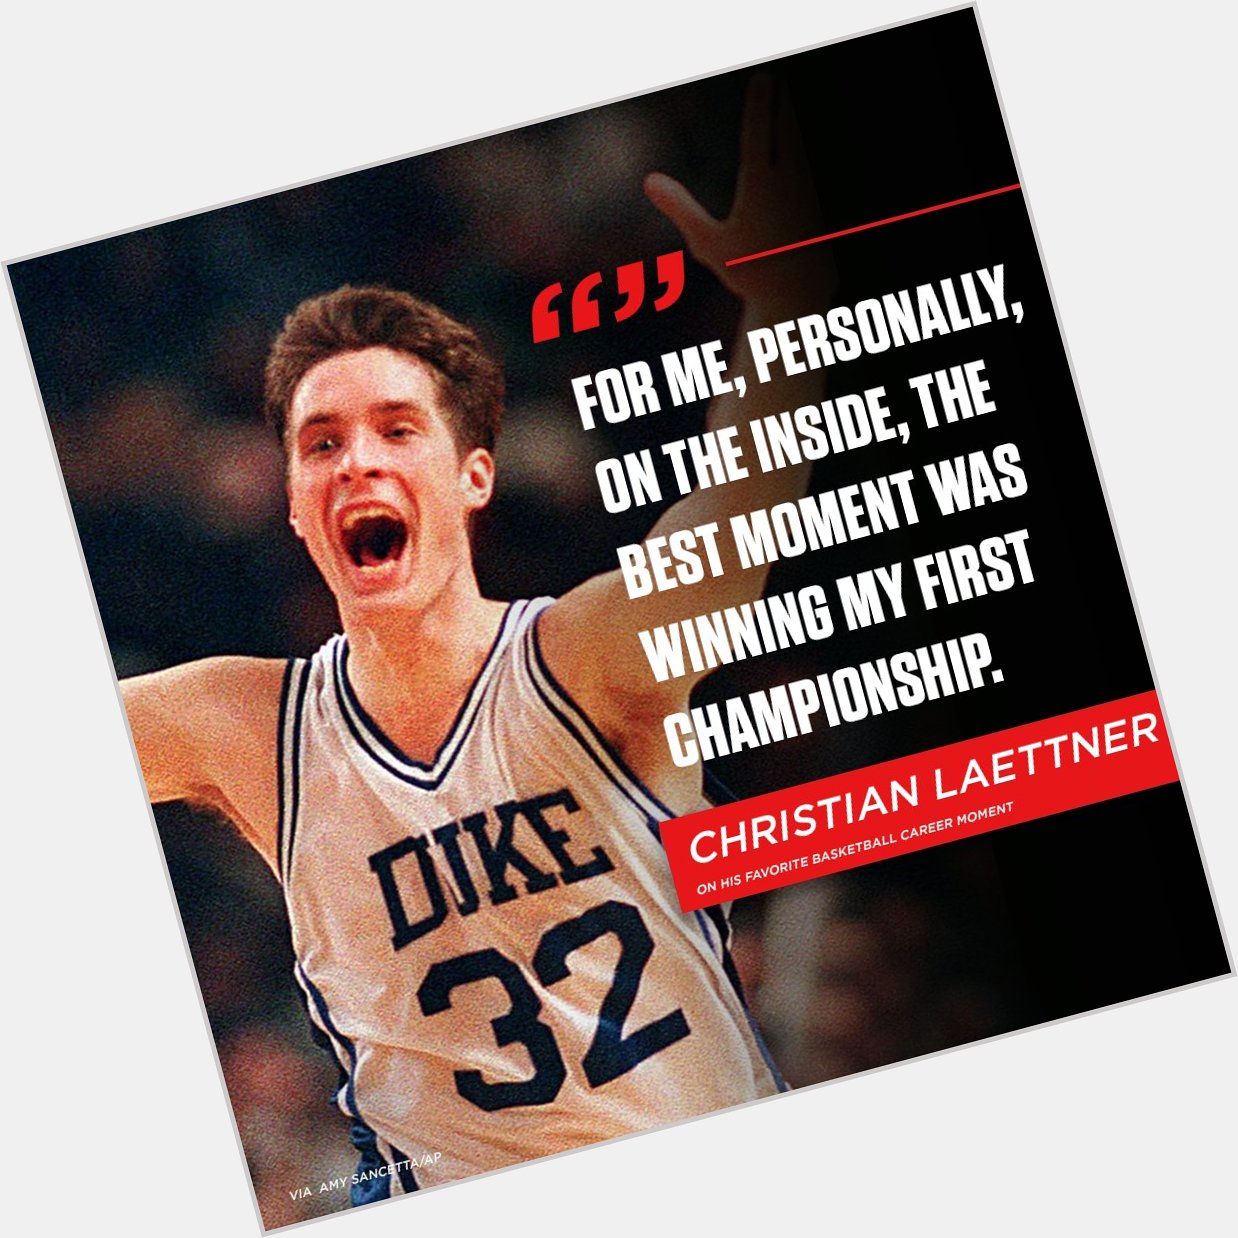 Happy 52nd Birthday to \The Shot\ legend, Christian Laettner.

Crazy that his iconic NCAA moment was 29 years ago. 